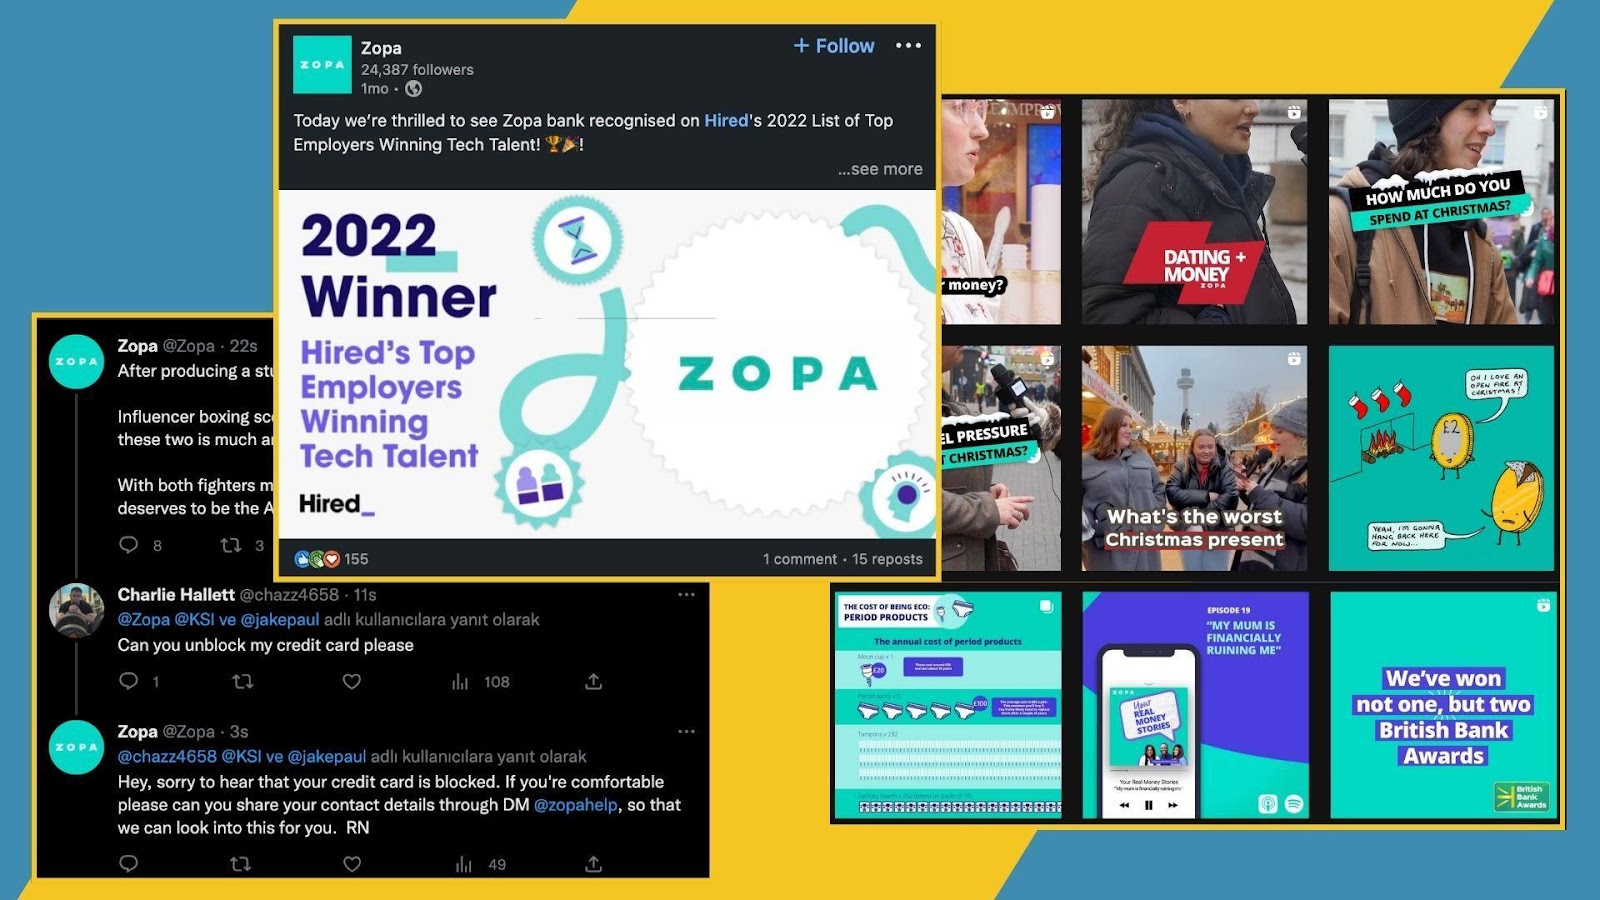 Screenshots from Zopa Money’s Instagram, Twitter, and LinkedIn accounts.